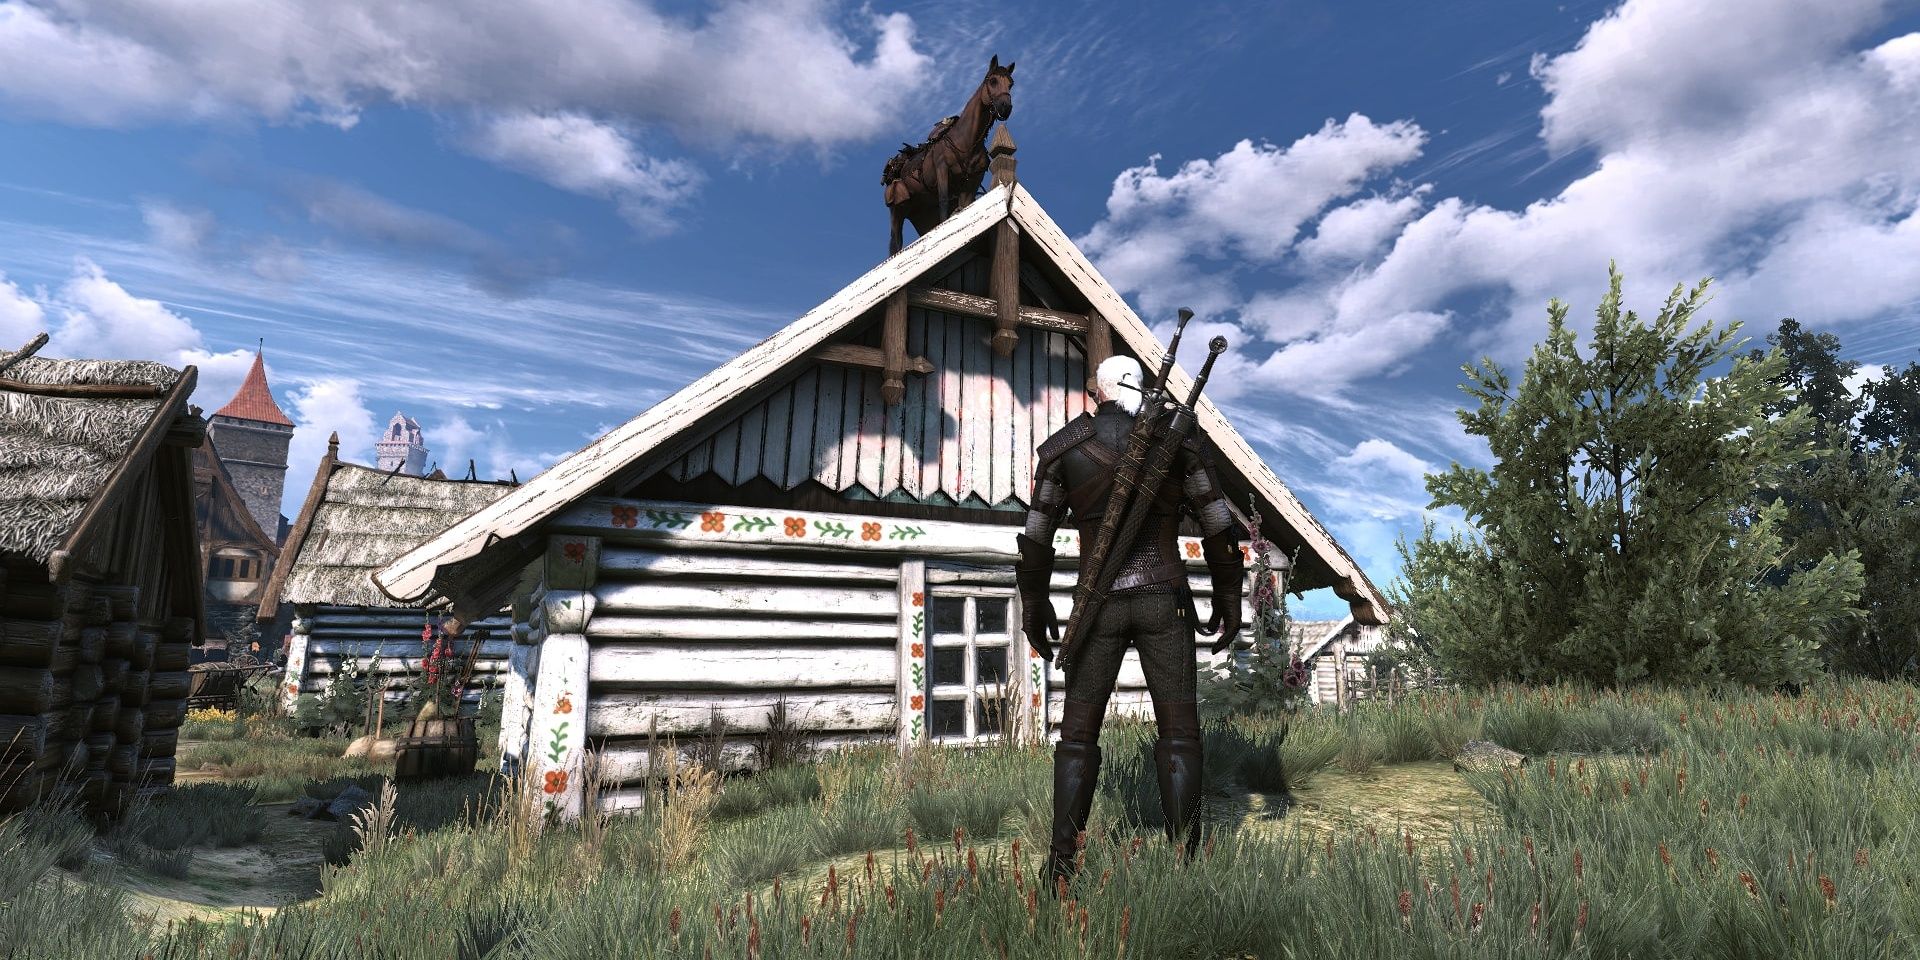 Geralt looking at Roach on a roof